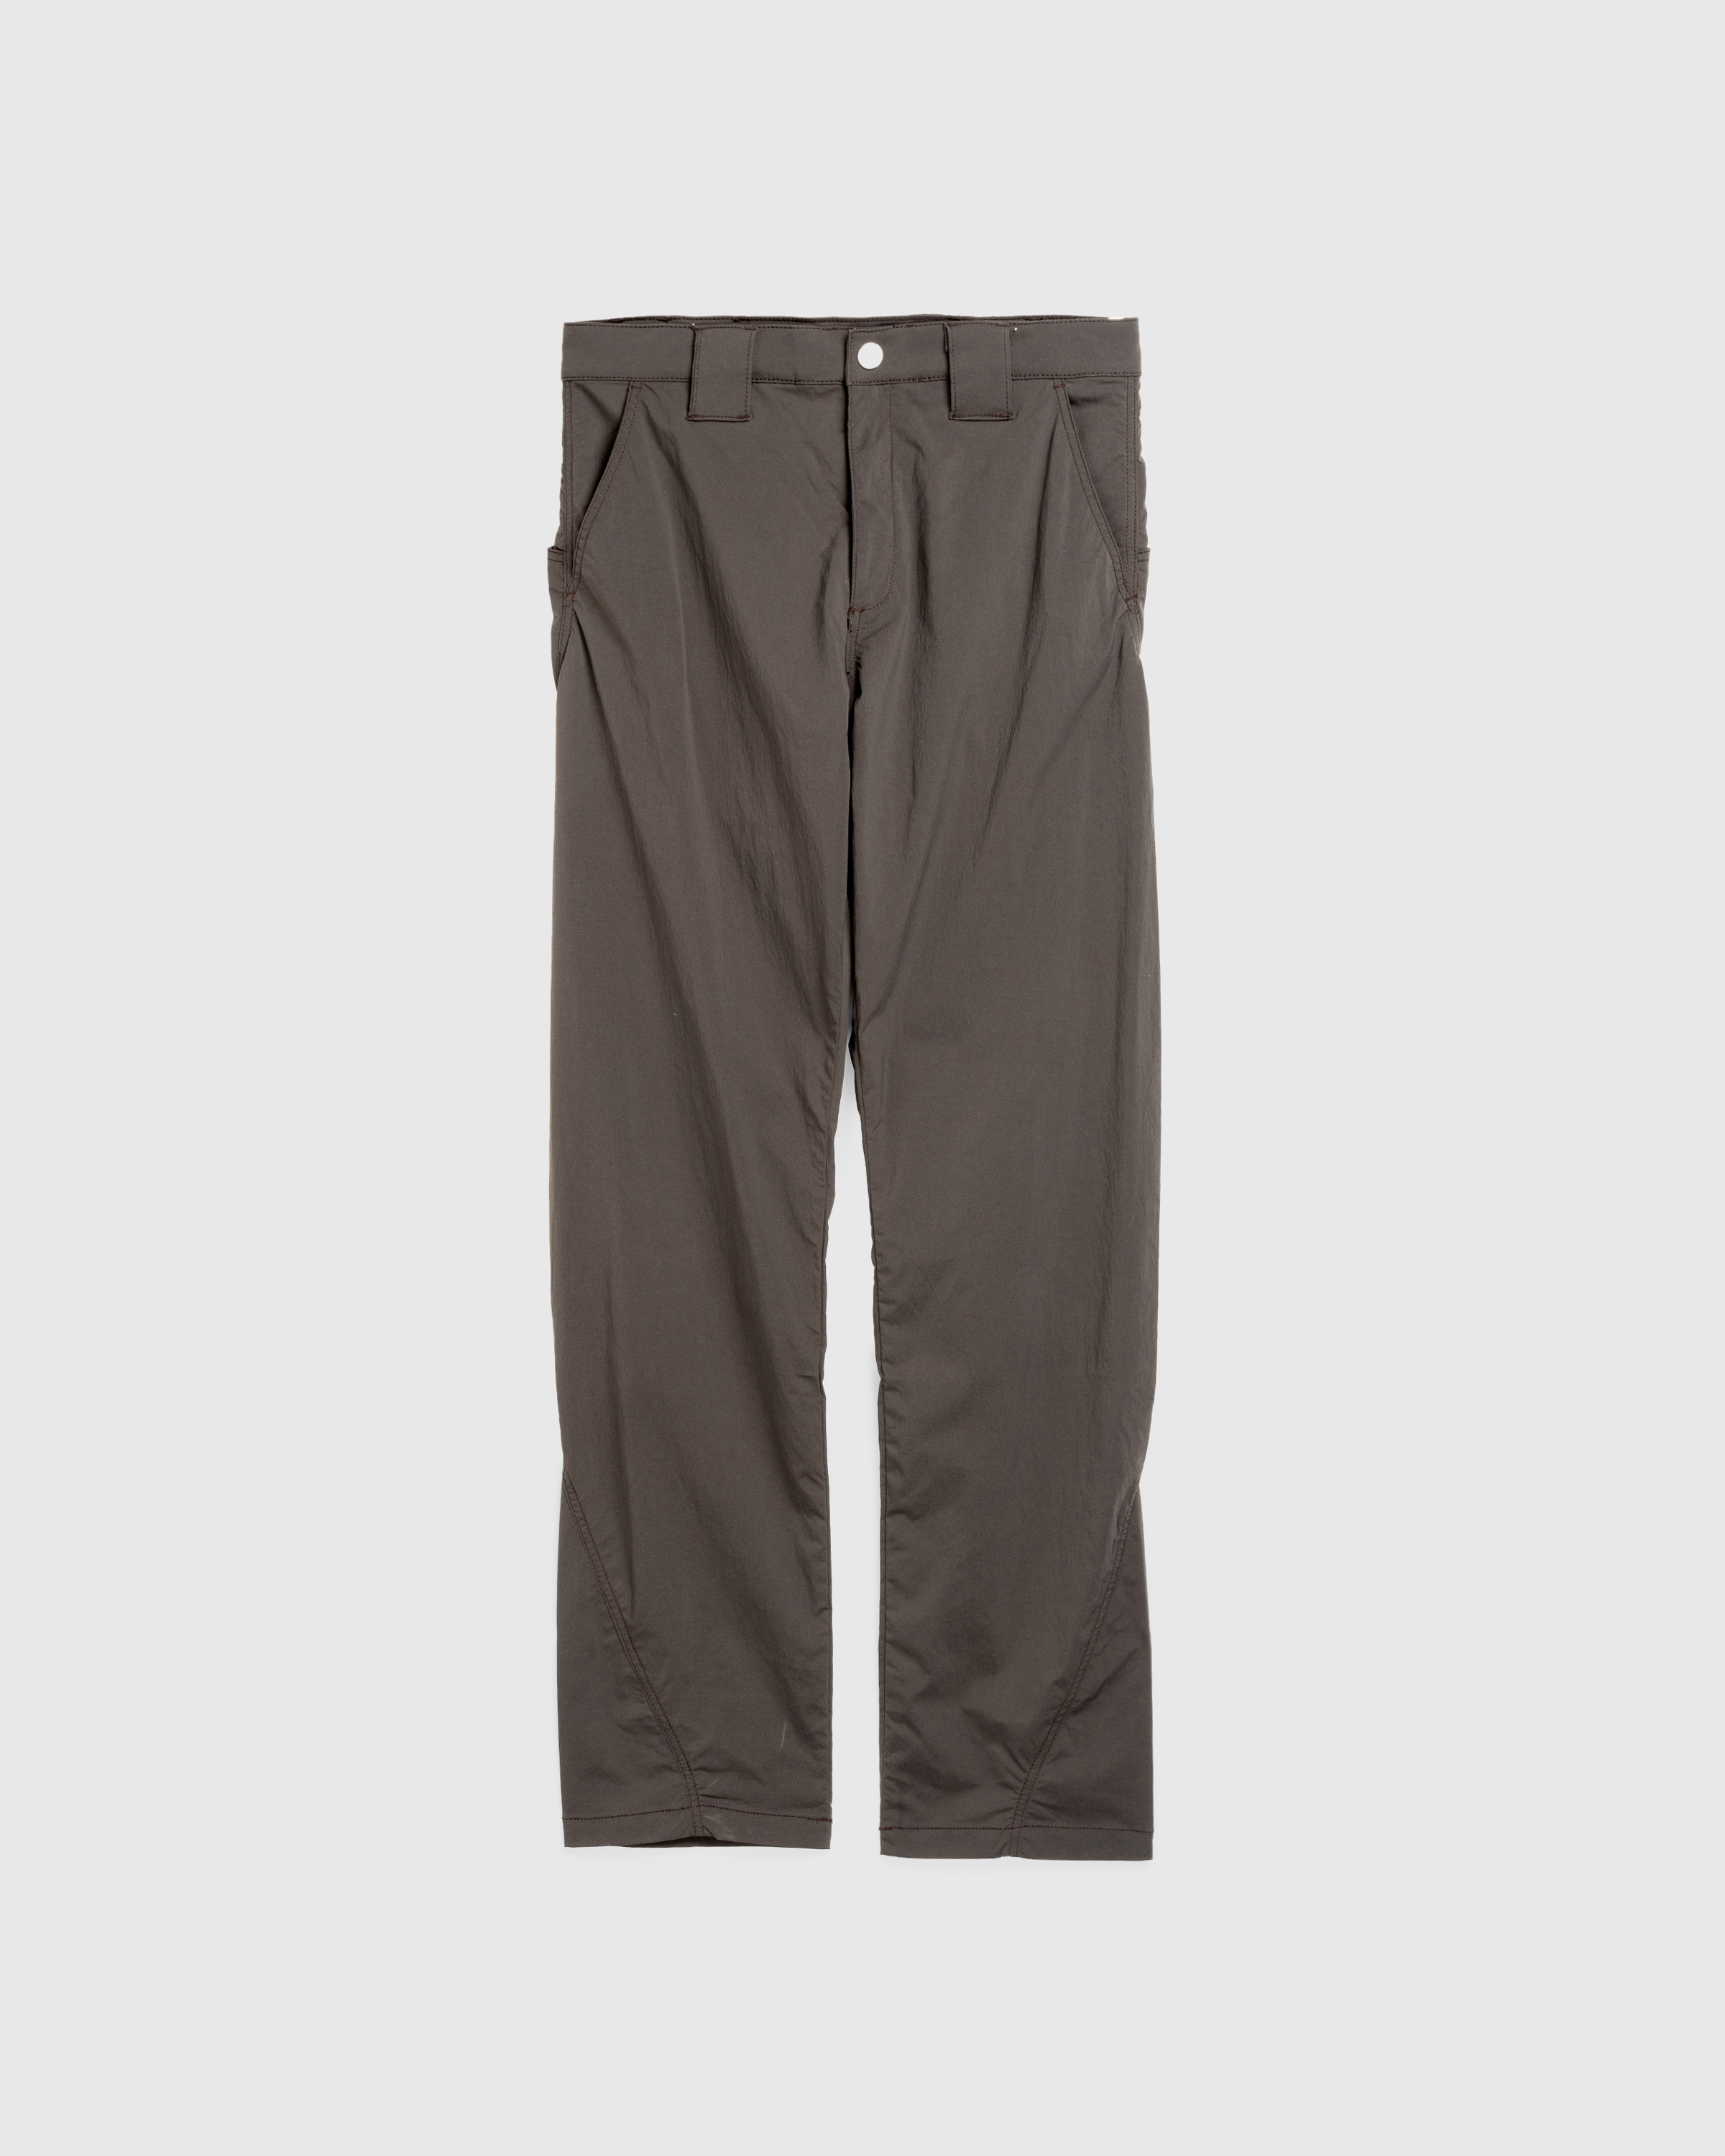 AFFXWRKS – Curved Pant Shale Brown - Trousers - Brown - Image 1